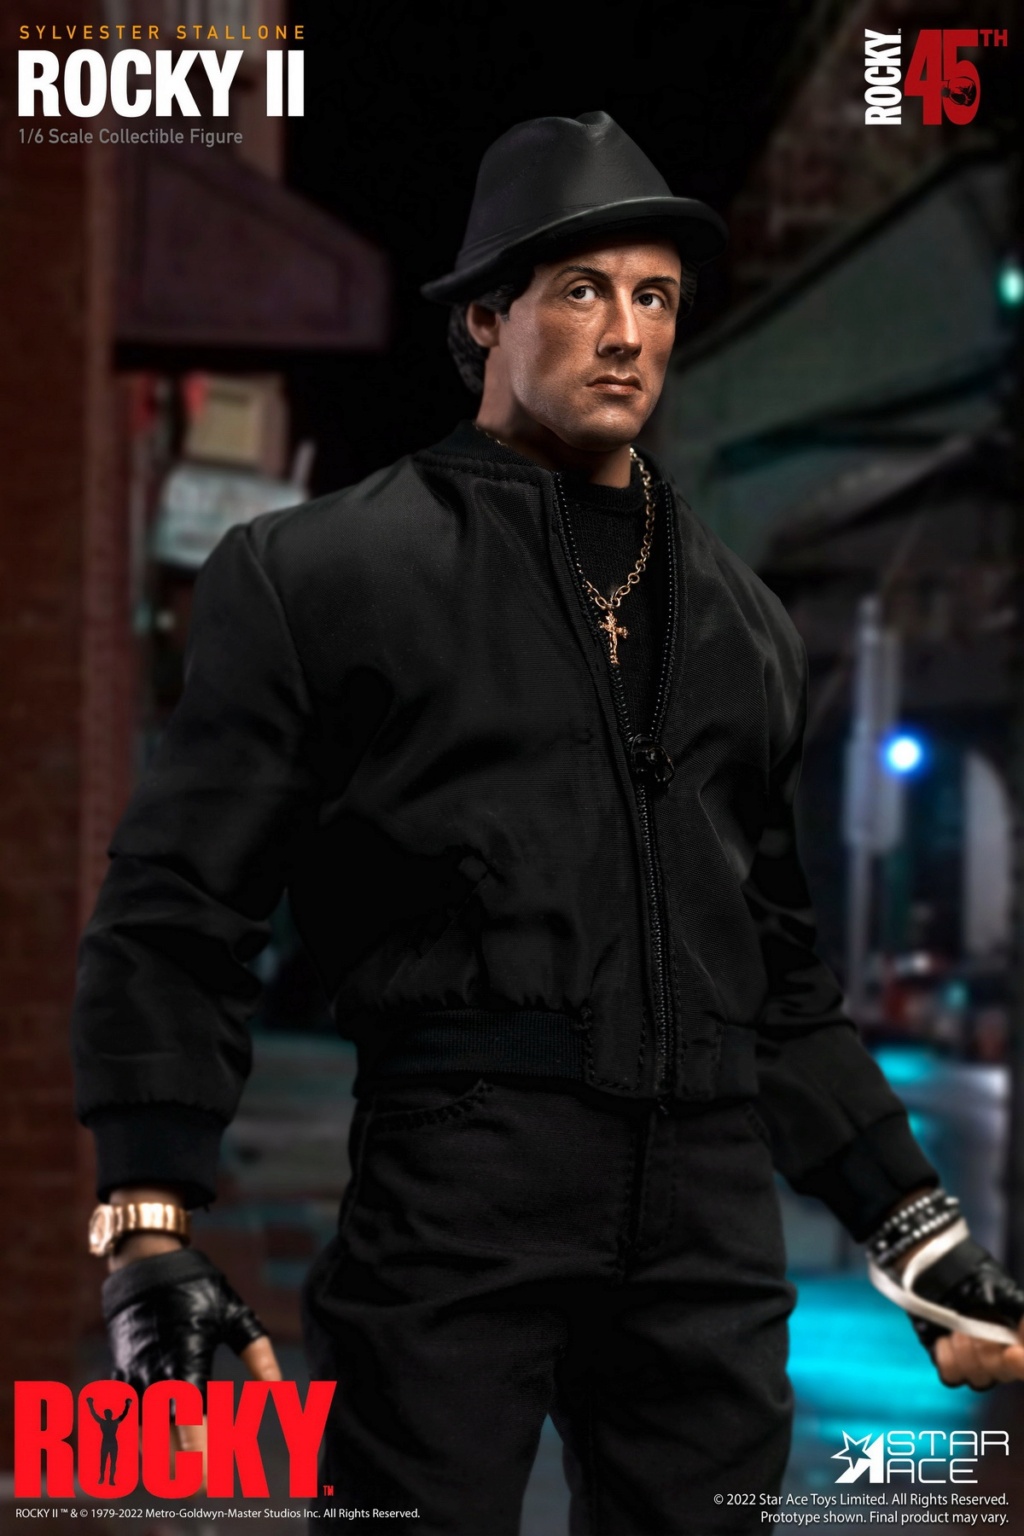 StarAceToys - NEW PRODUCT: STAR ACE Toys: 1/6 Rocky II: Rocky 1.0 [Stallone] Deluxe Edition/Normal Edition (SA0117/8) 12180311